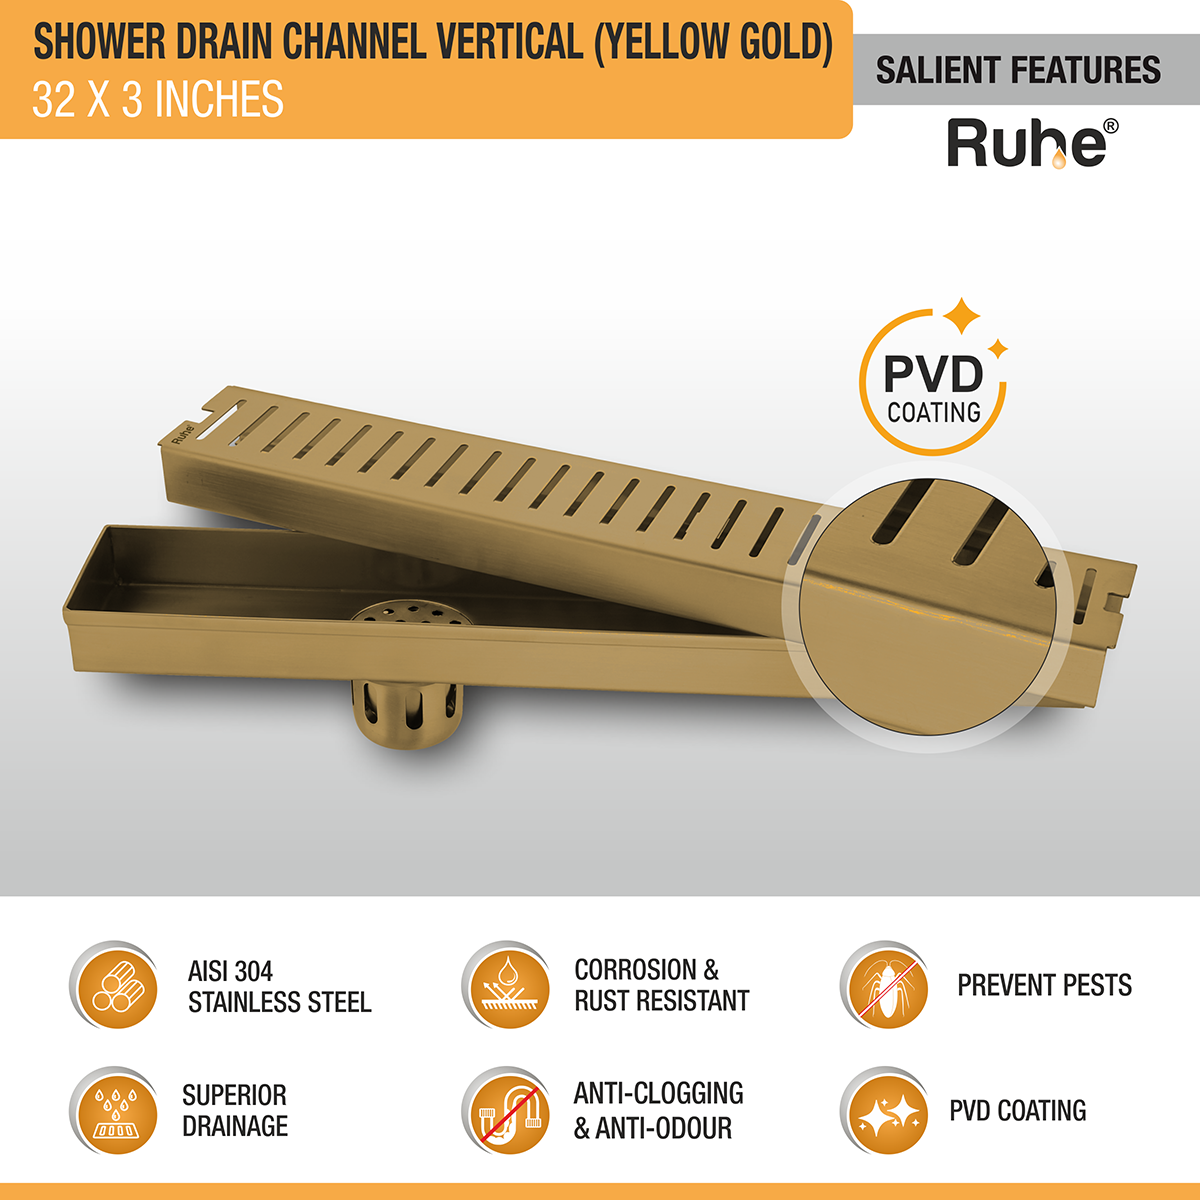 Vertical Shower Drain Channel (32 x 3 Inches) YELLOW GOLD features